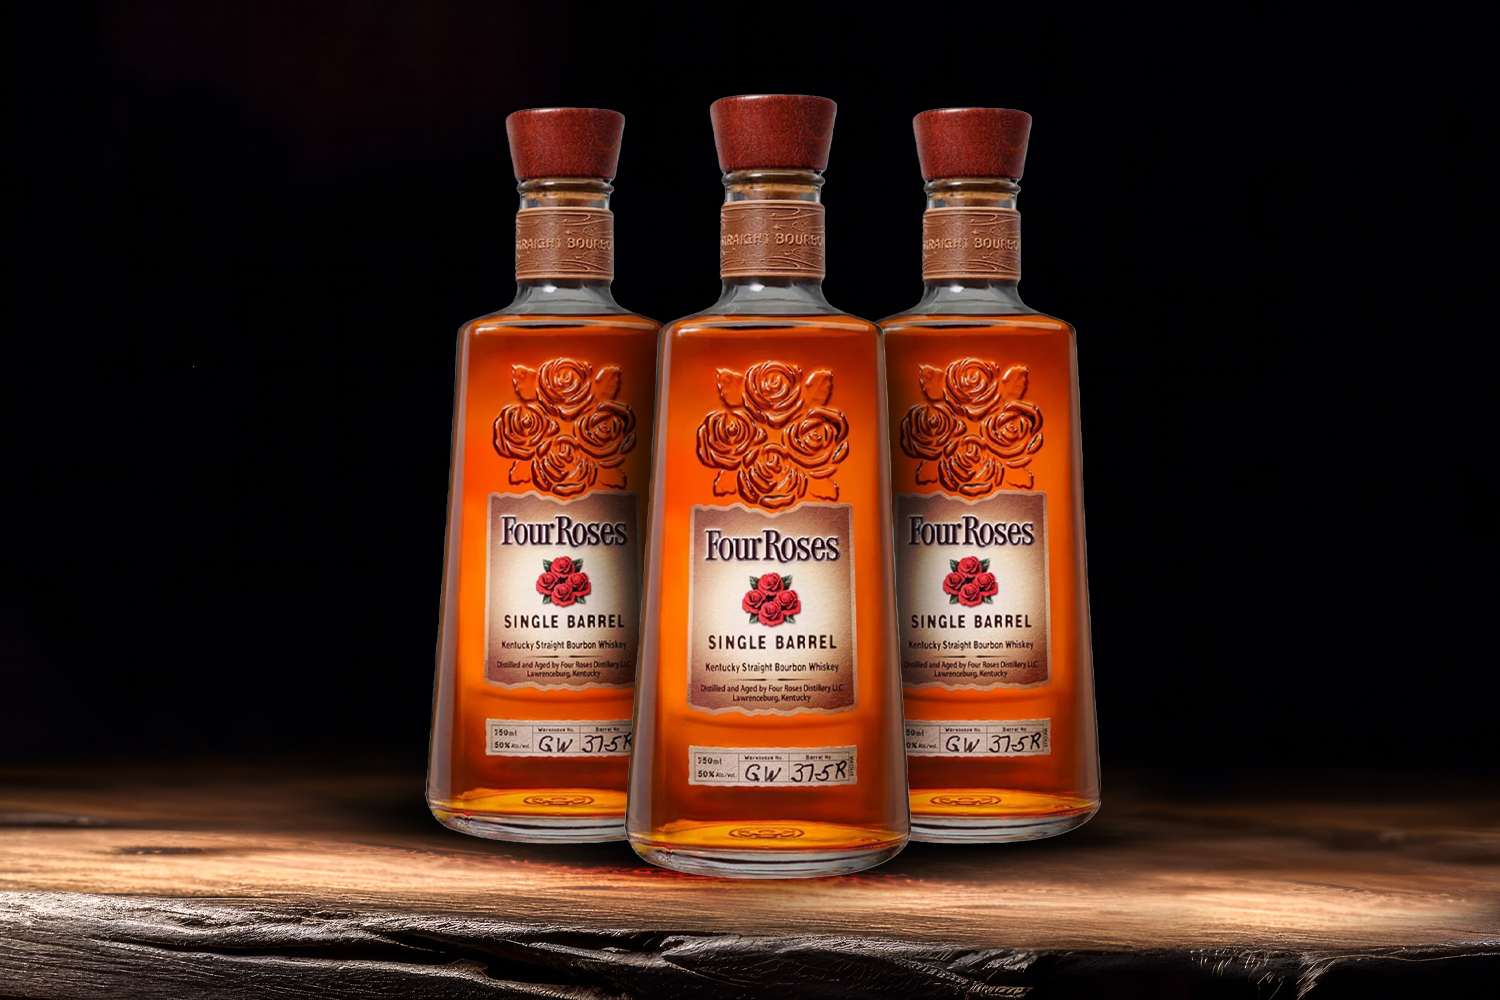 3 bottles of four roses on a wooden table